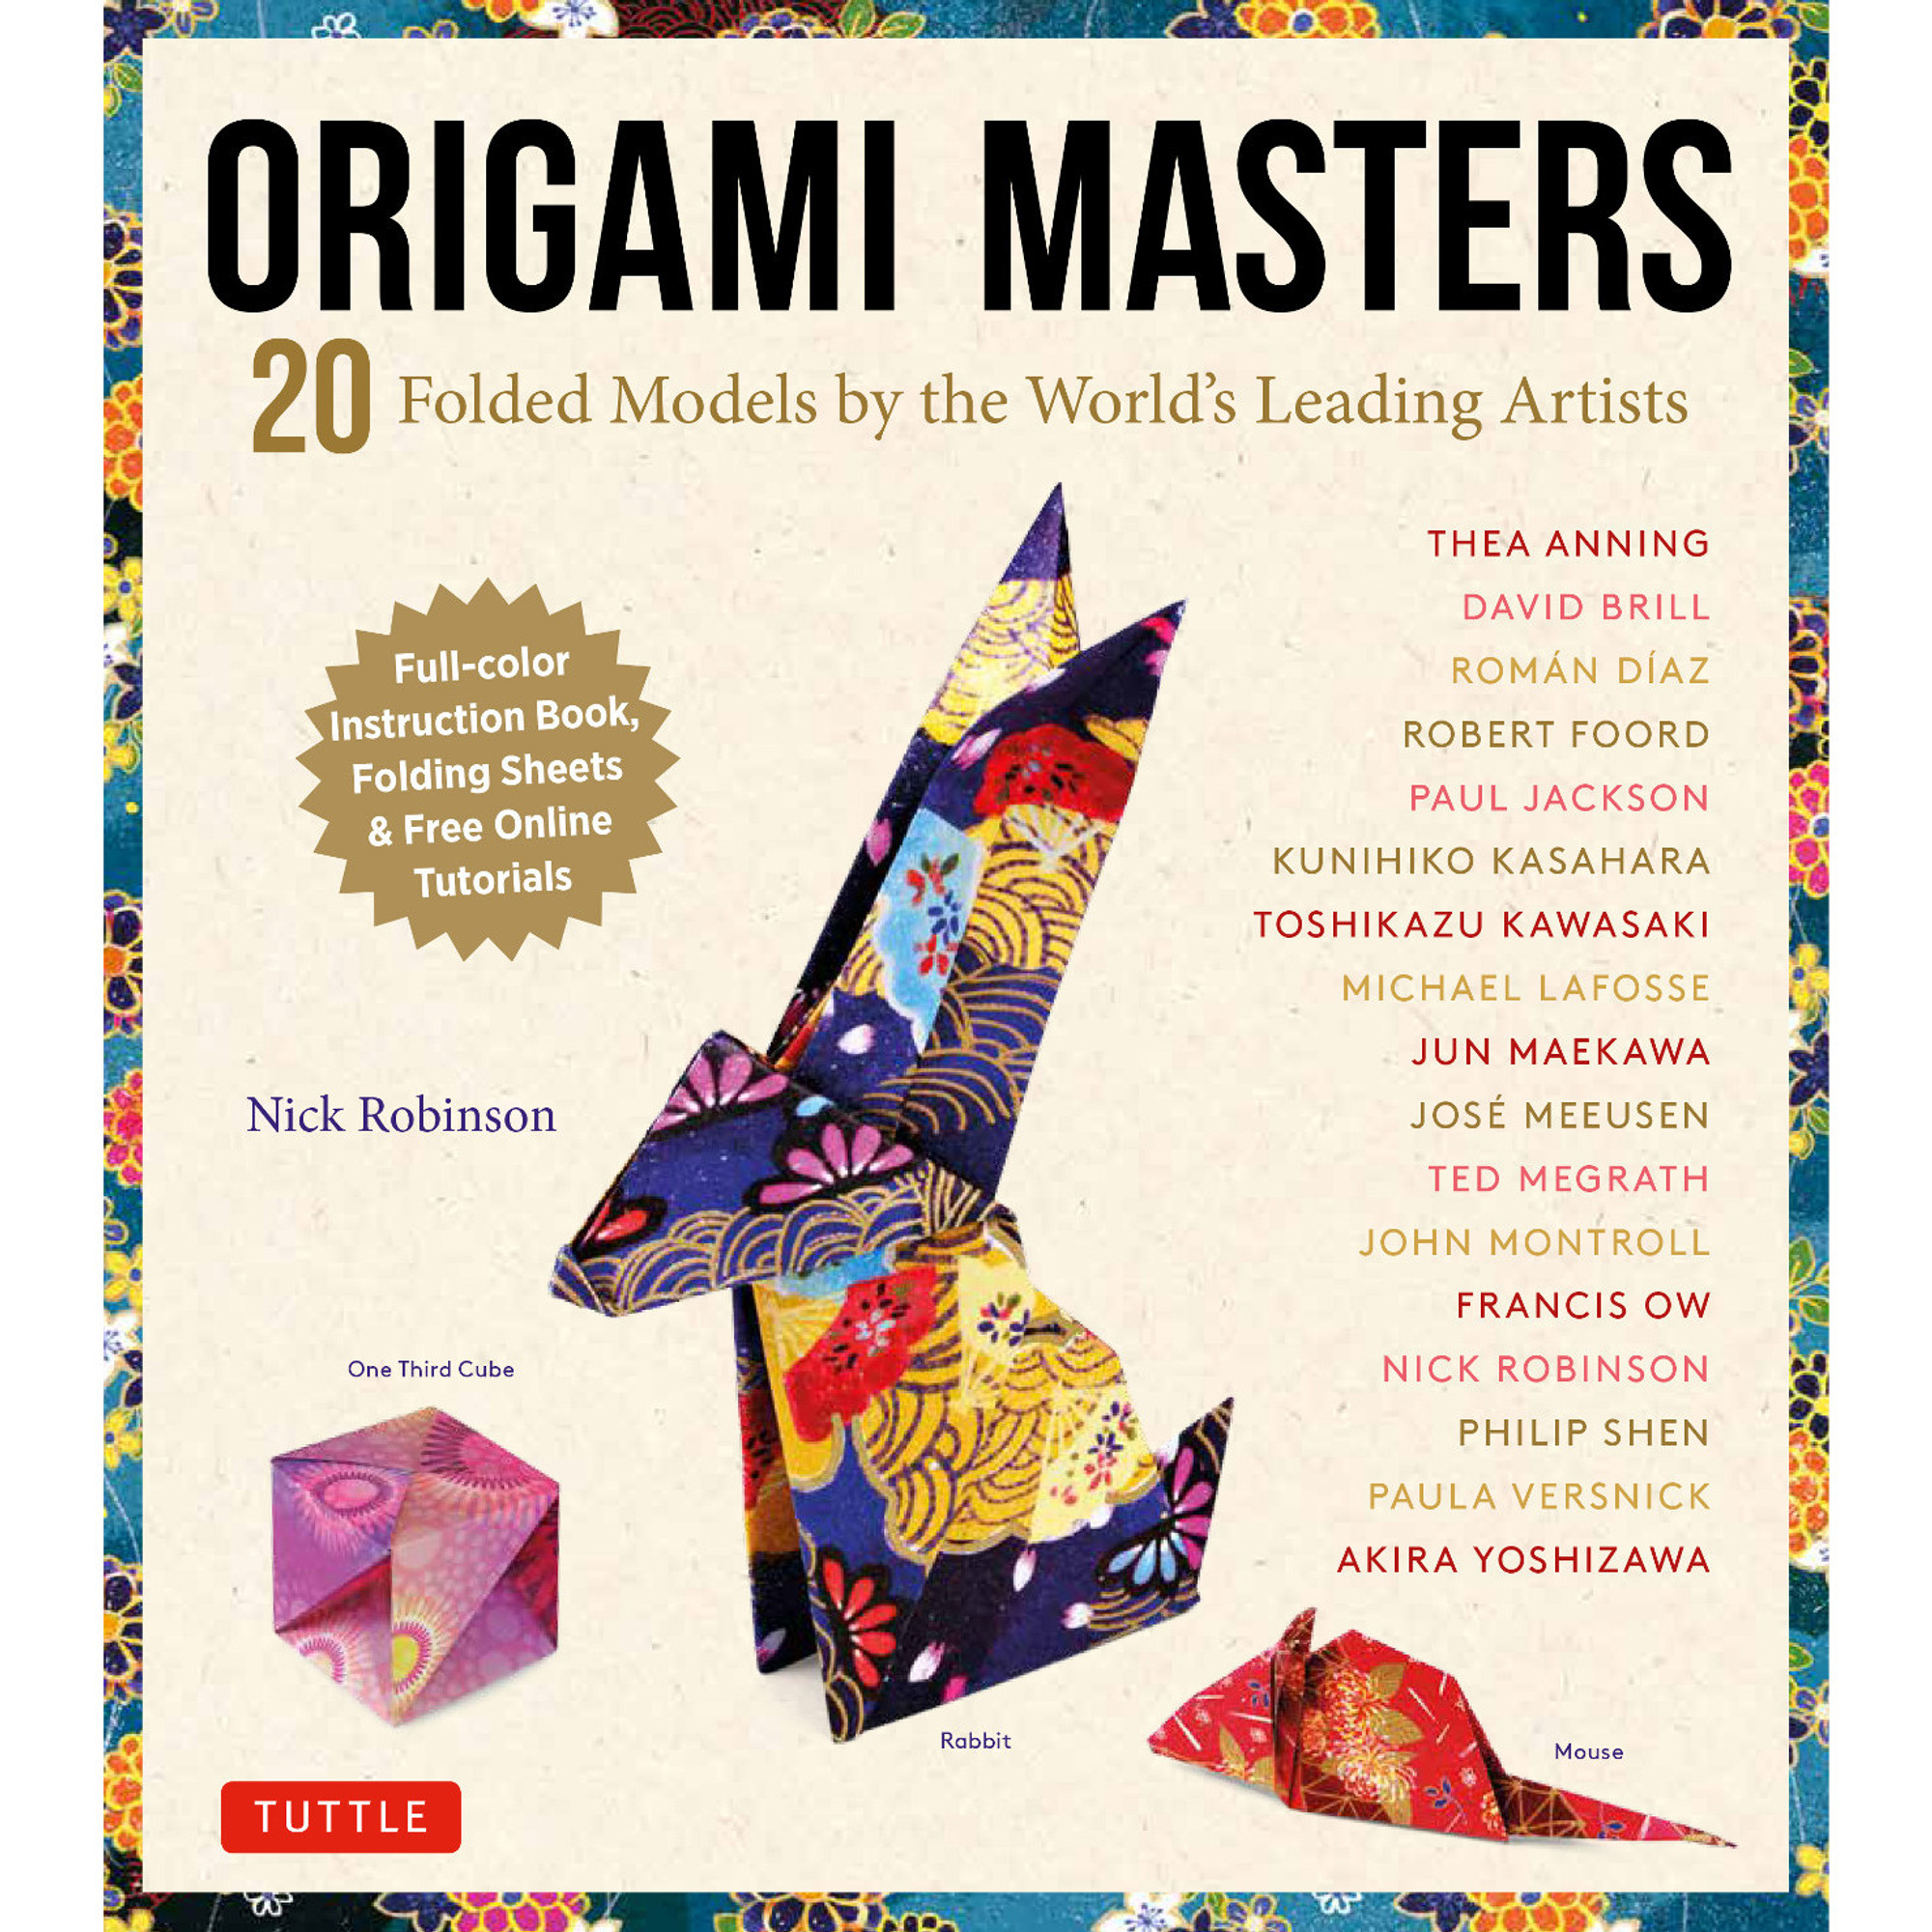 The Ultimate Origami Book: 20 Projects and 184 Pages of Super Cool